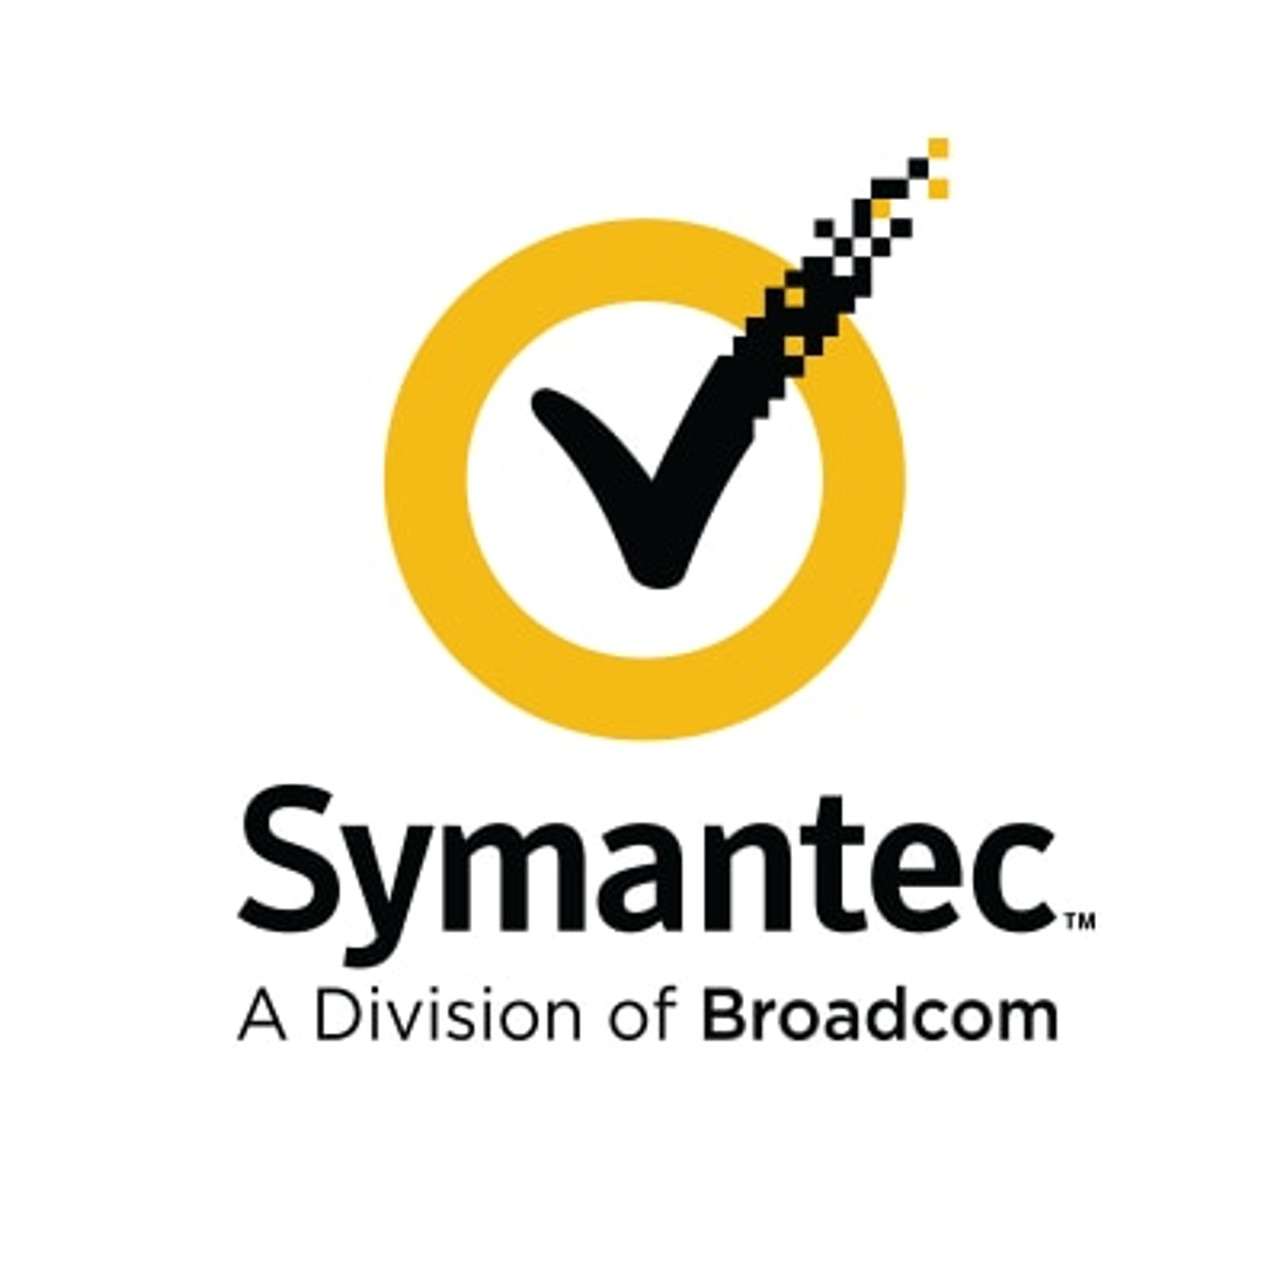 Symantec Advanced Endpoint Defense (without SEP), Initial Hybrid Subscription License with Support, 100-249 Devices 3 YR